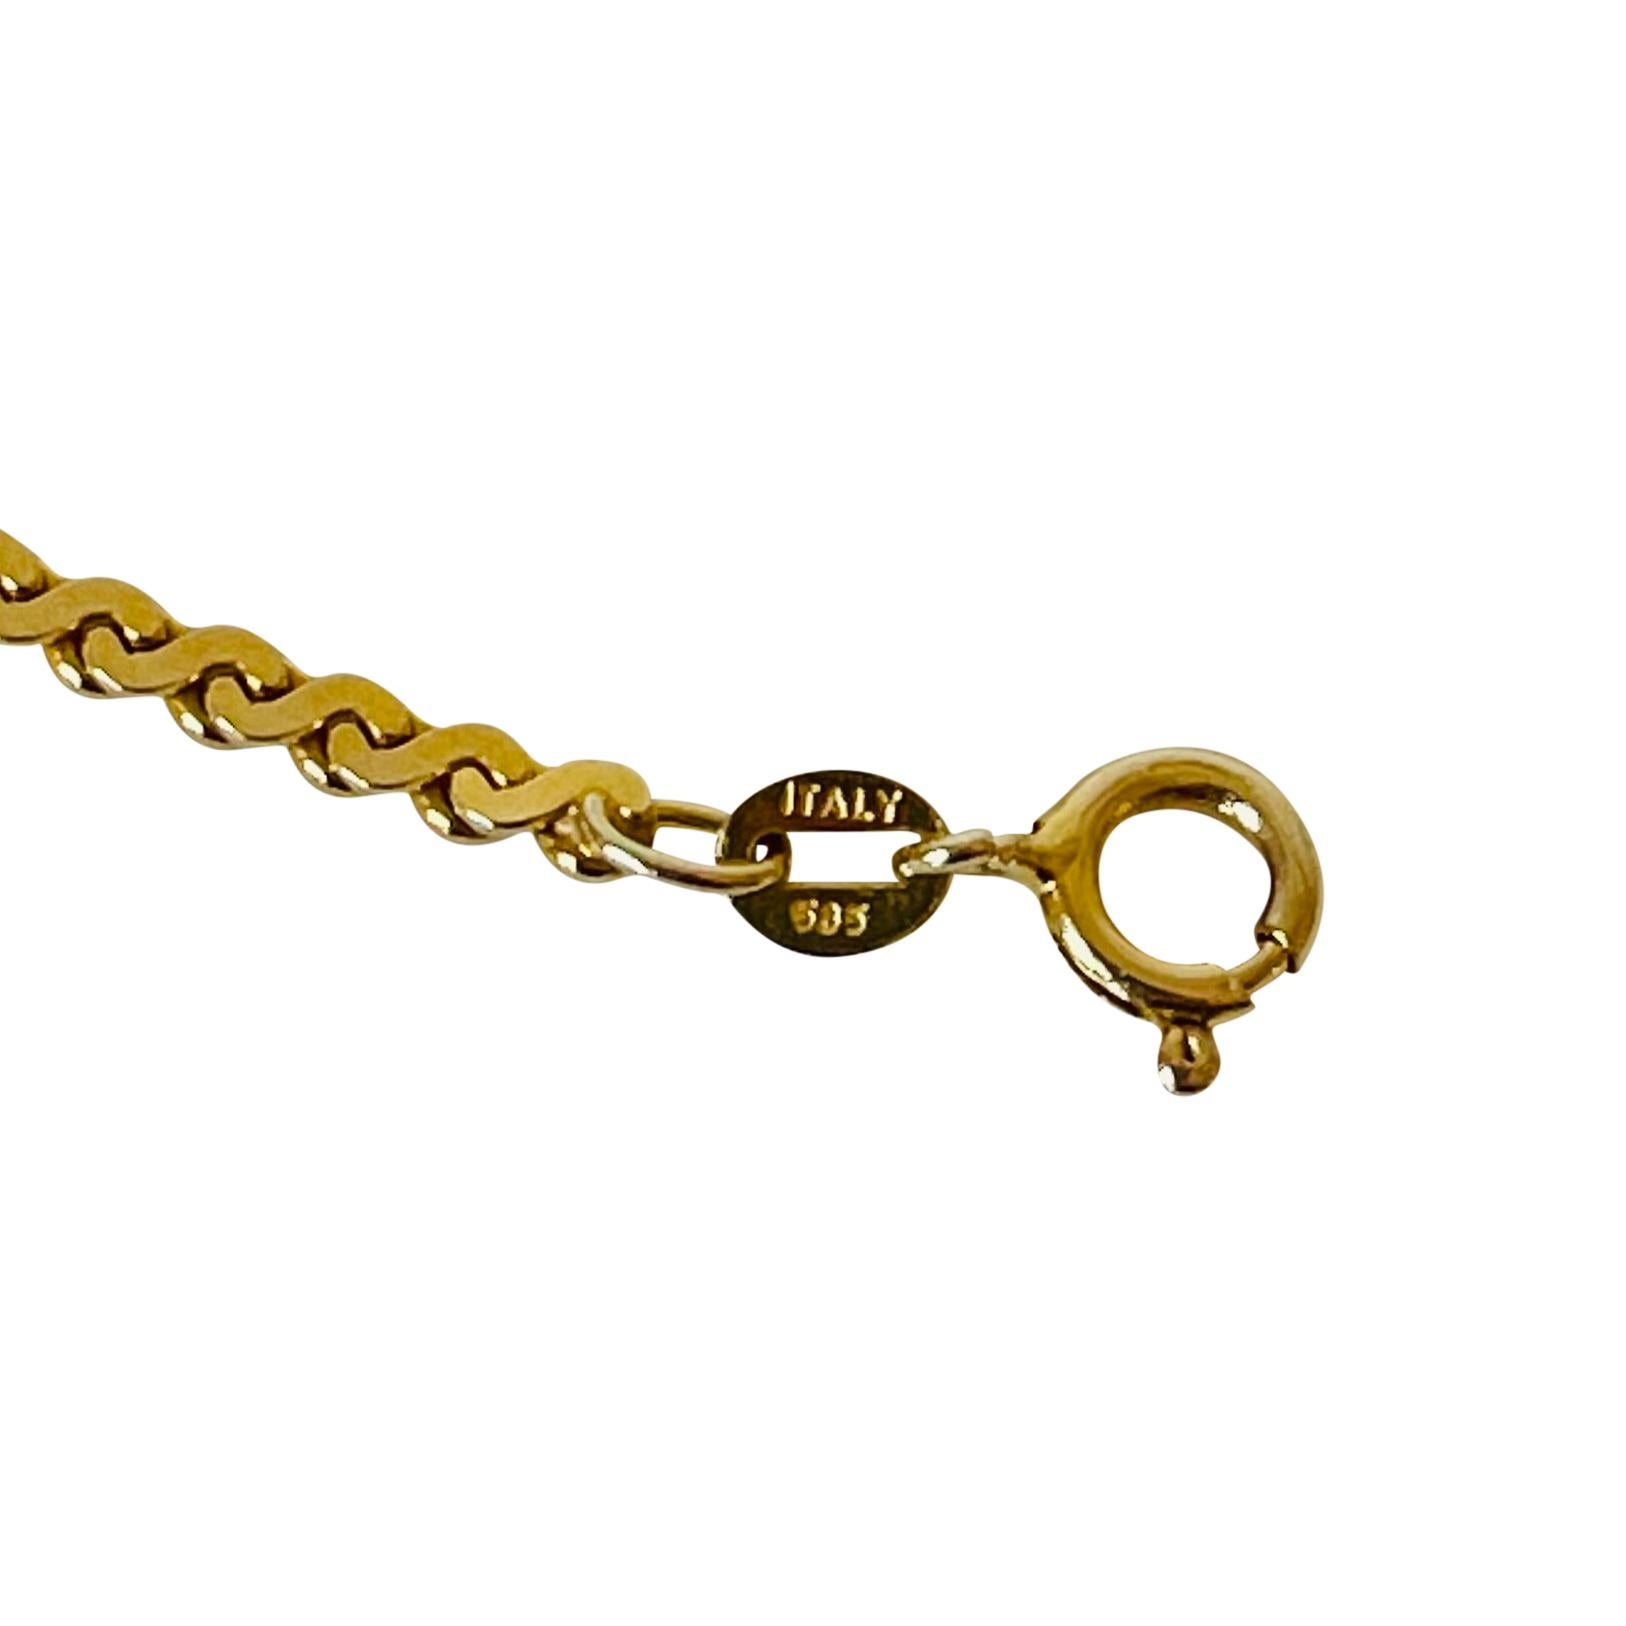 Women's 14 Karat Yellow Gold 11.8g Solid Serpentine S Link Link Chain Necklace, Italy